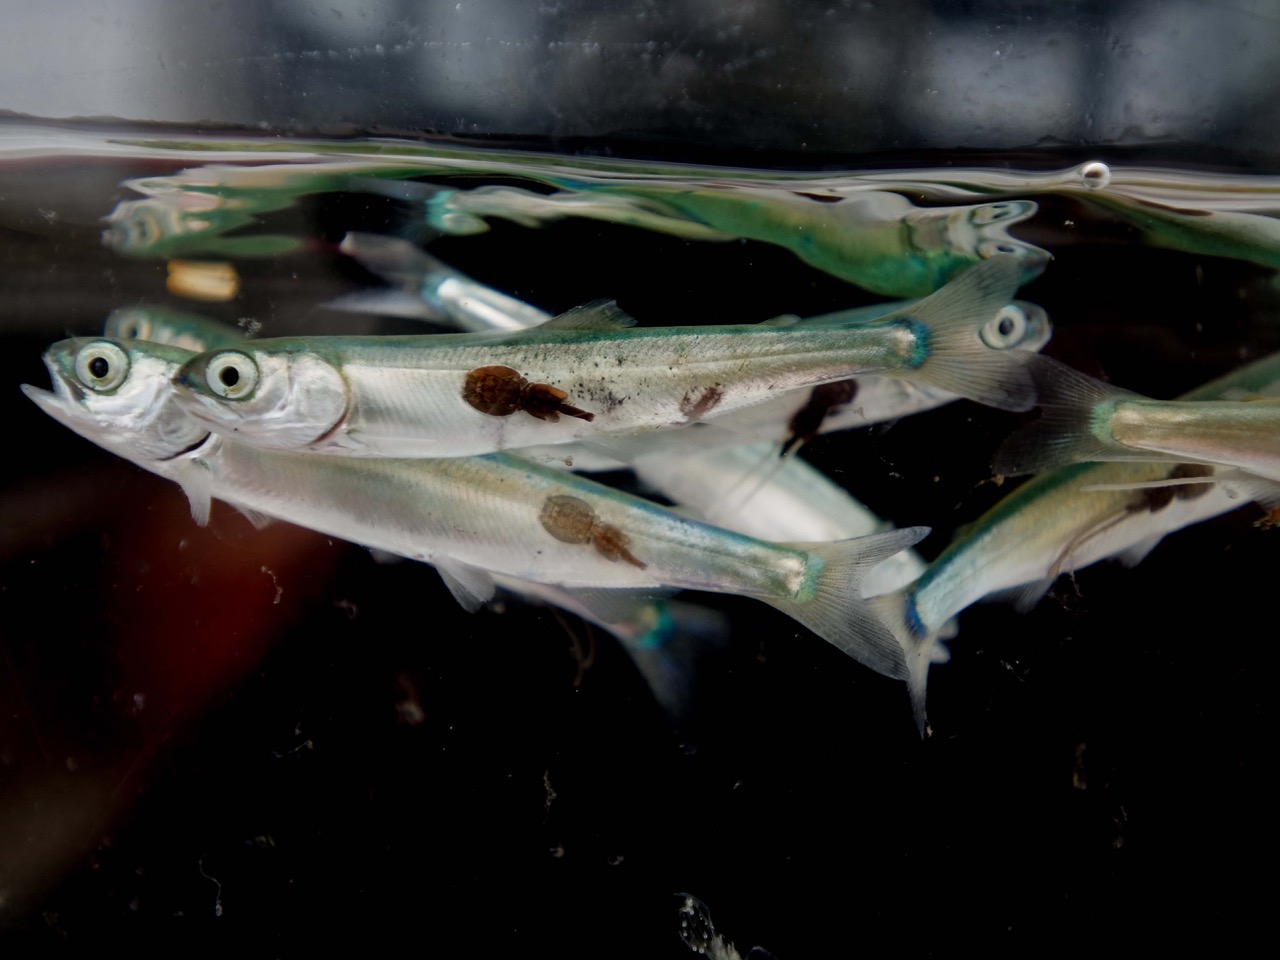 A juvenile salmon with sea lice attached.